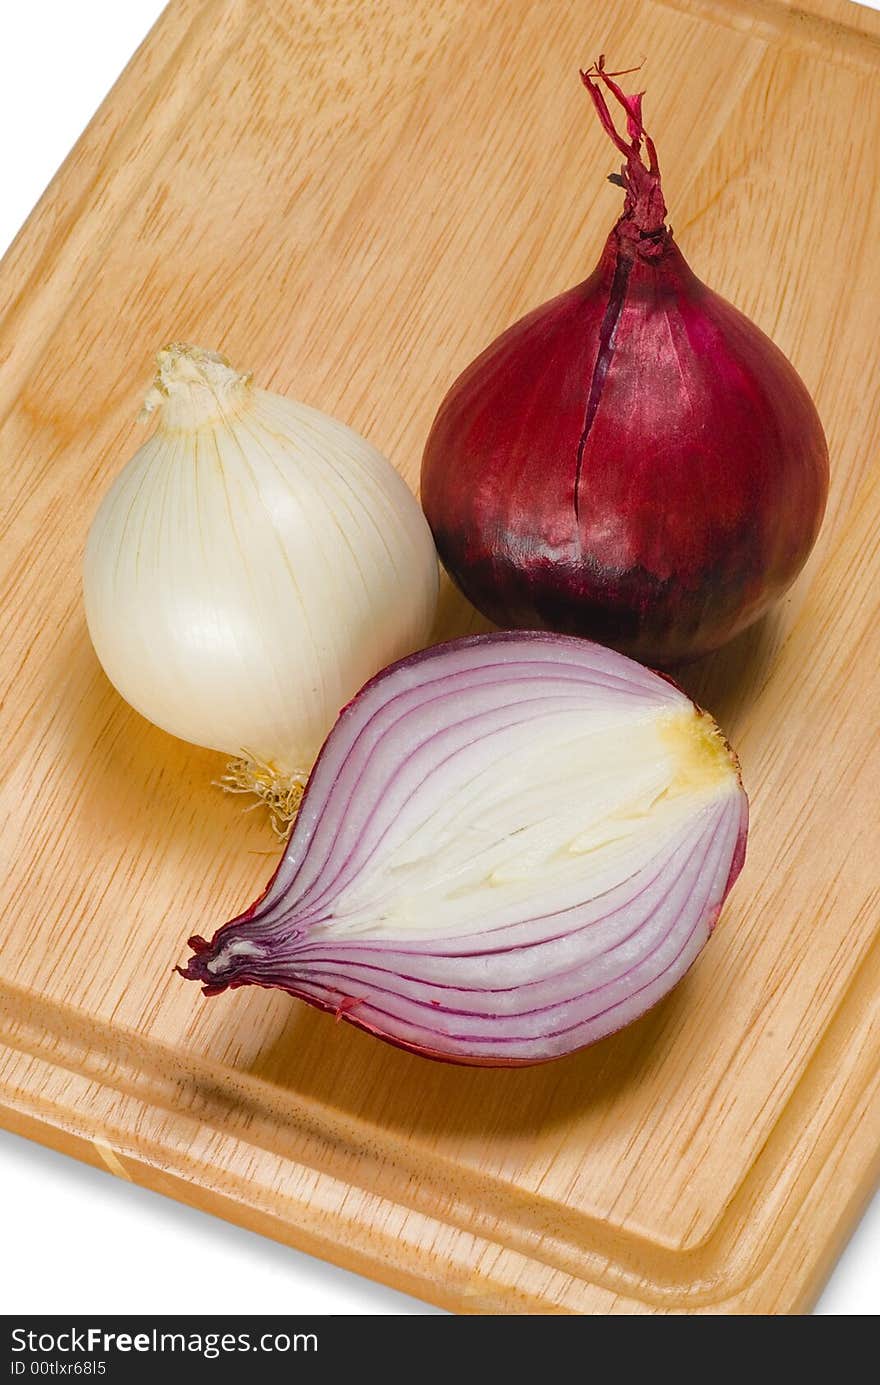 Half of red onion, the whole white and red ones. Half of red onion, the whole white and red ones